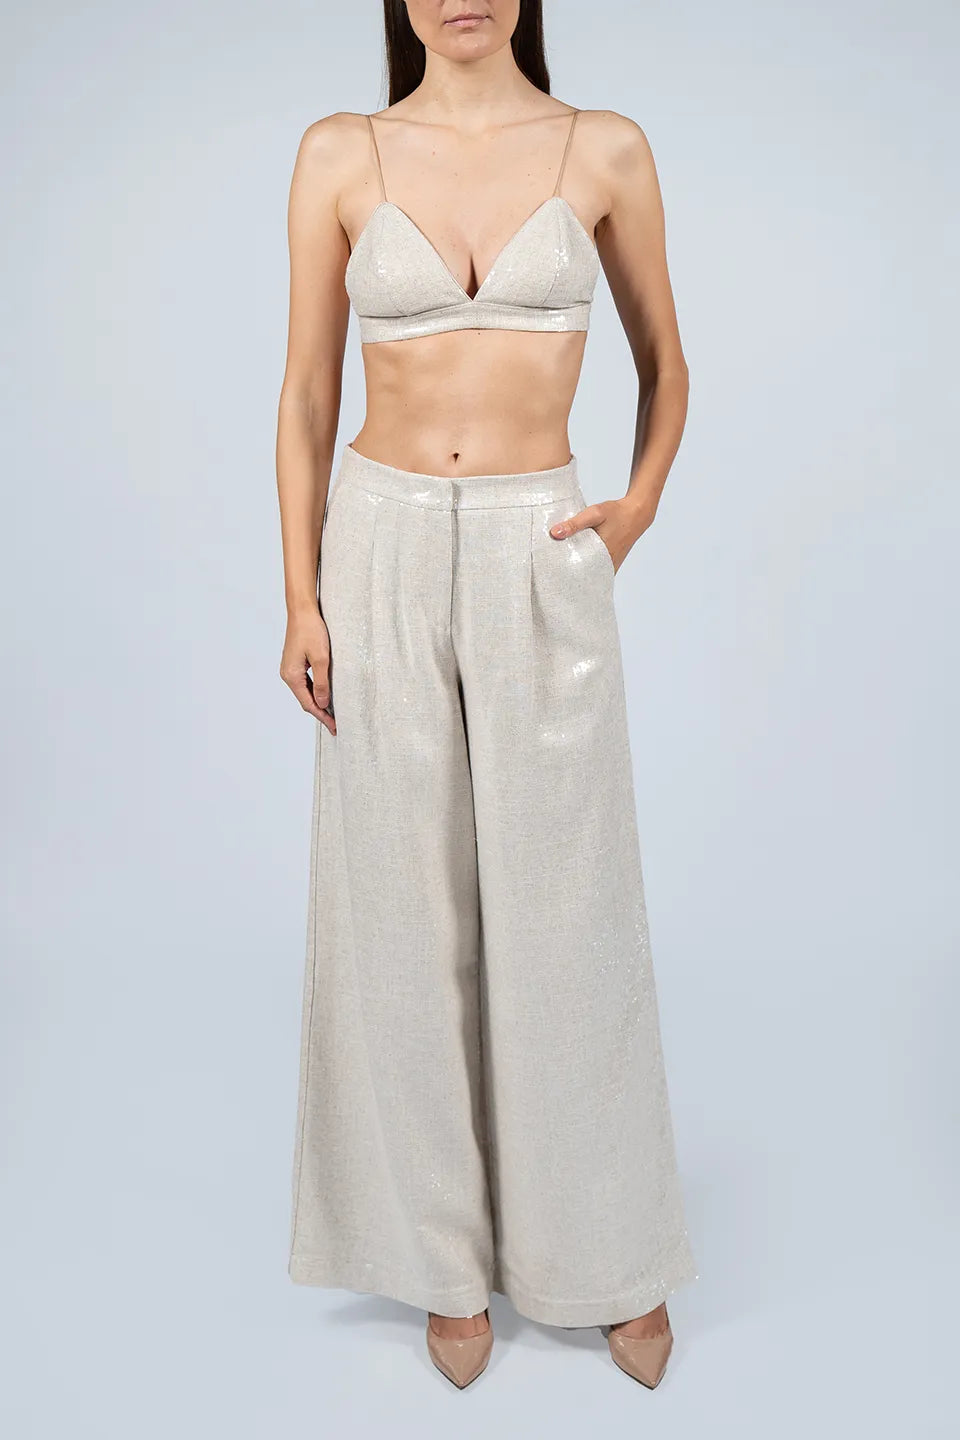 Shop online trendy Beige Women pants from Federica Tosi Fashion designer. Product gallery 1